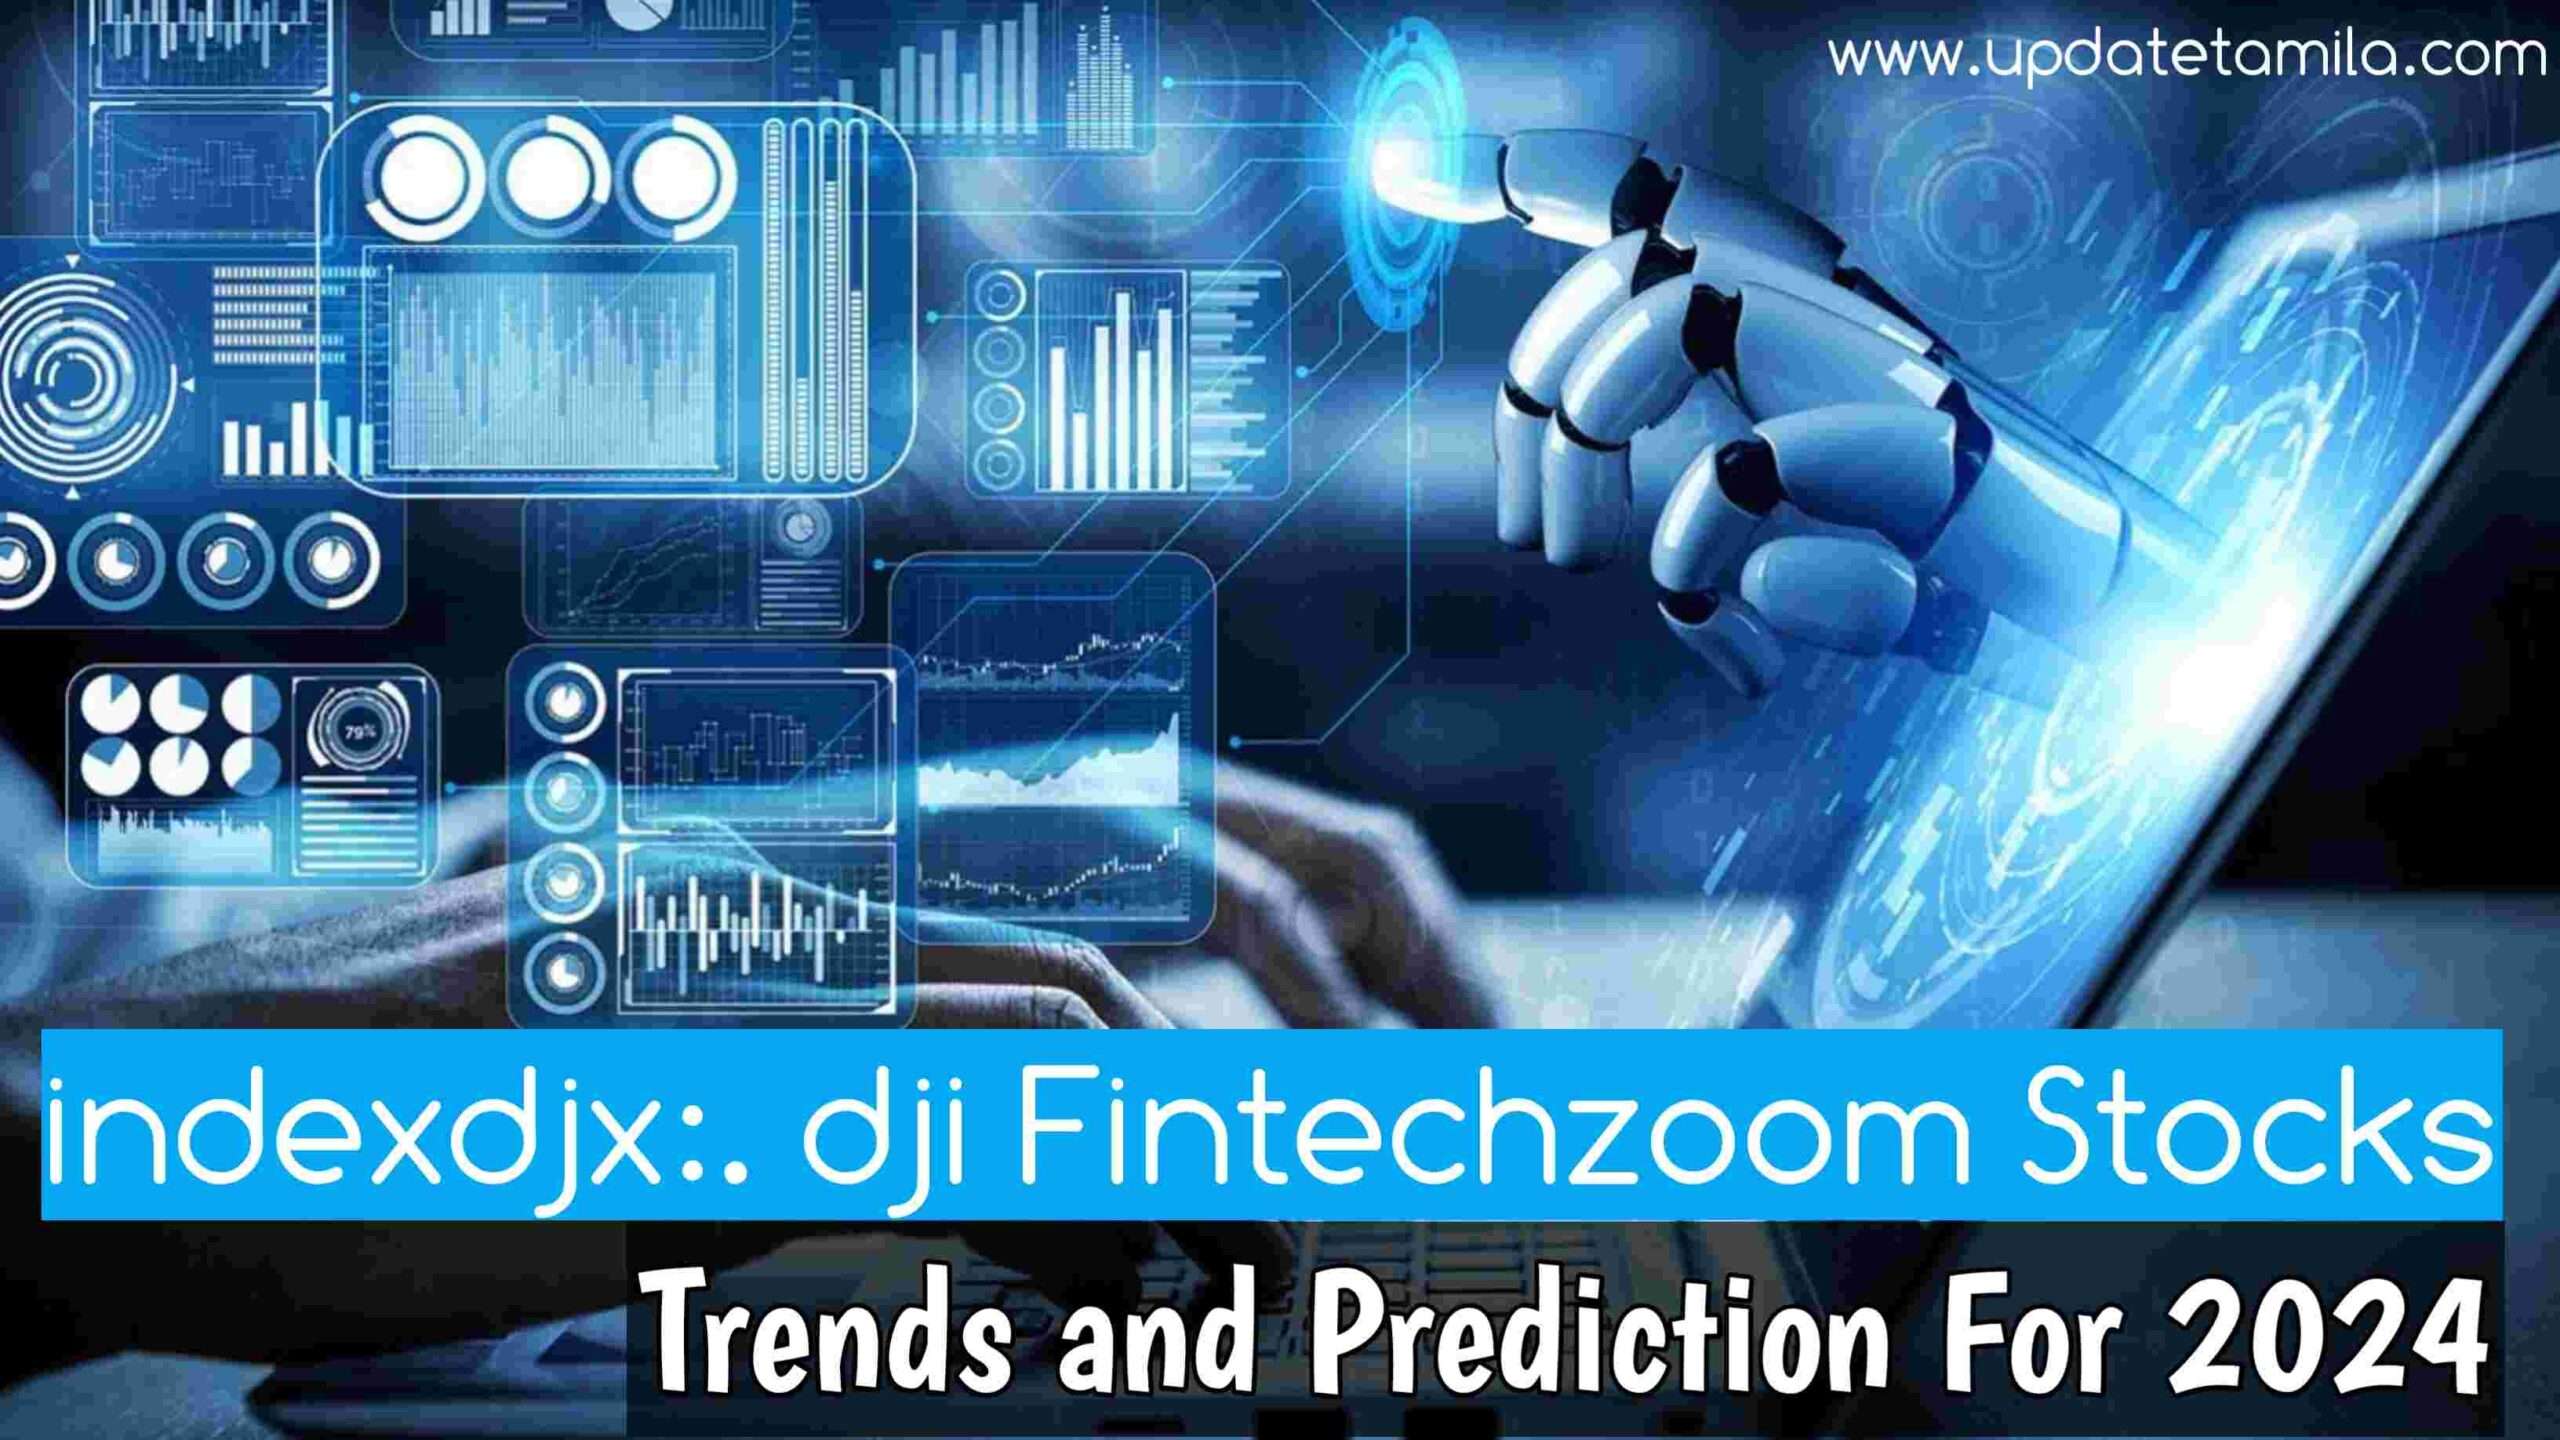 indexdjx:.dji Fintechzoom Stocks: Trends and Predictions for 2024